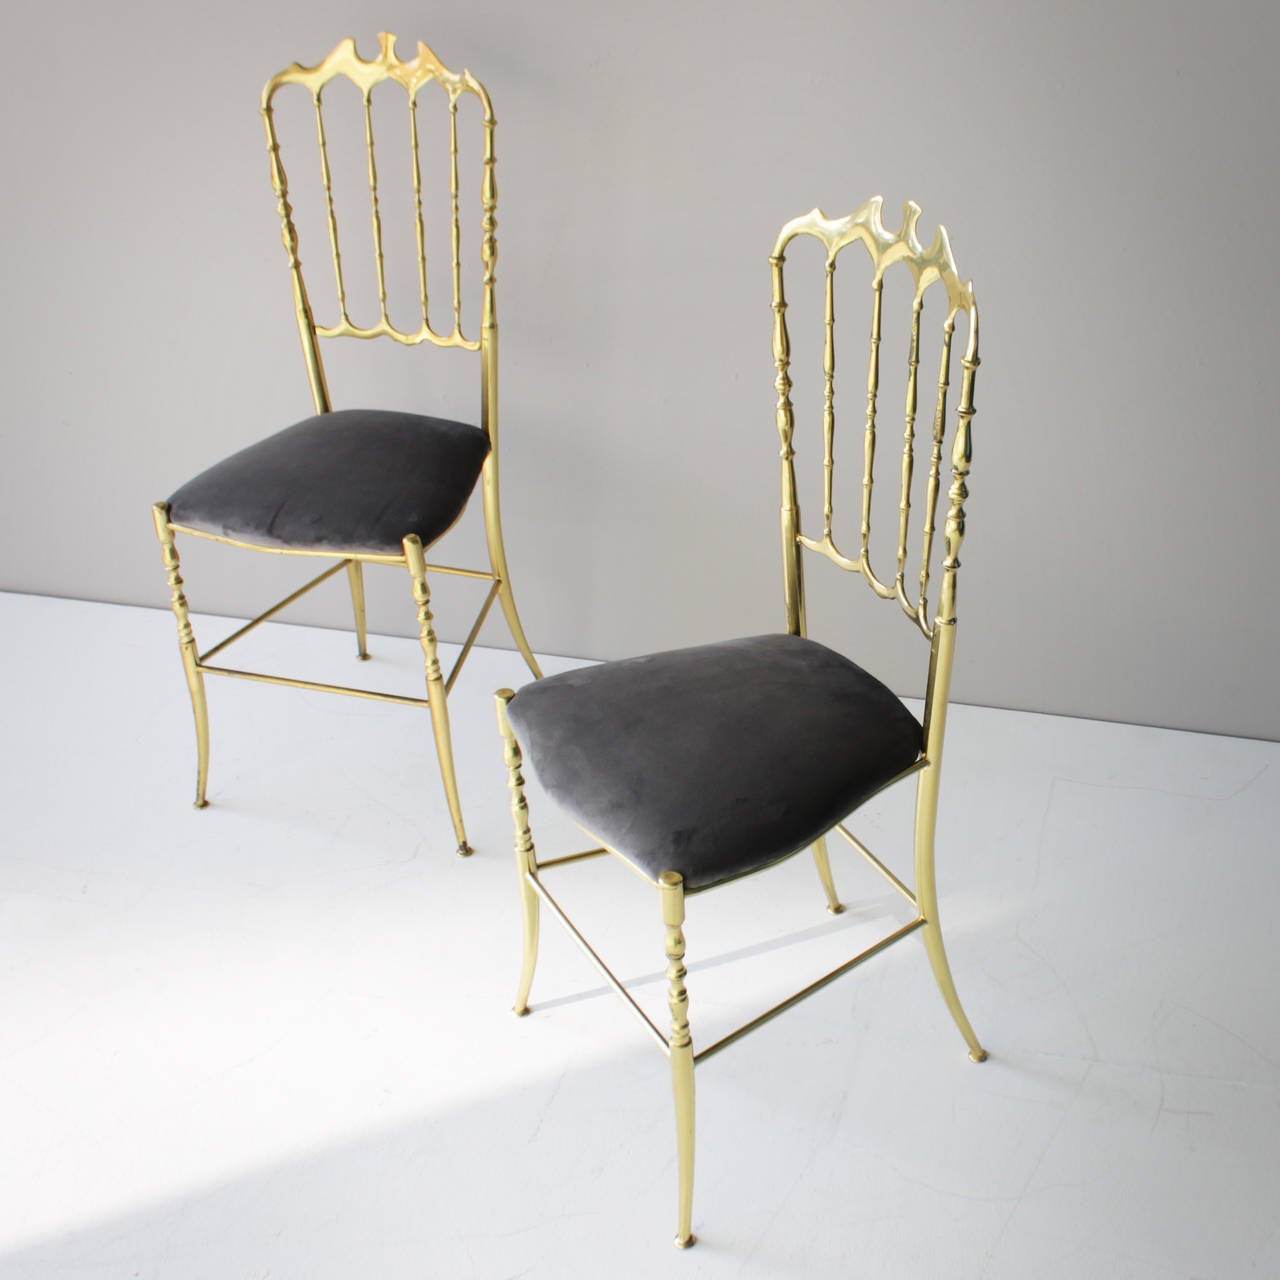 Couples Chiavari chairs made ​​of brass, 1950.
Seats with non-original velvet fabric, manufactured in Italy.